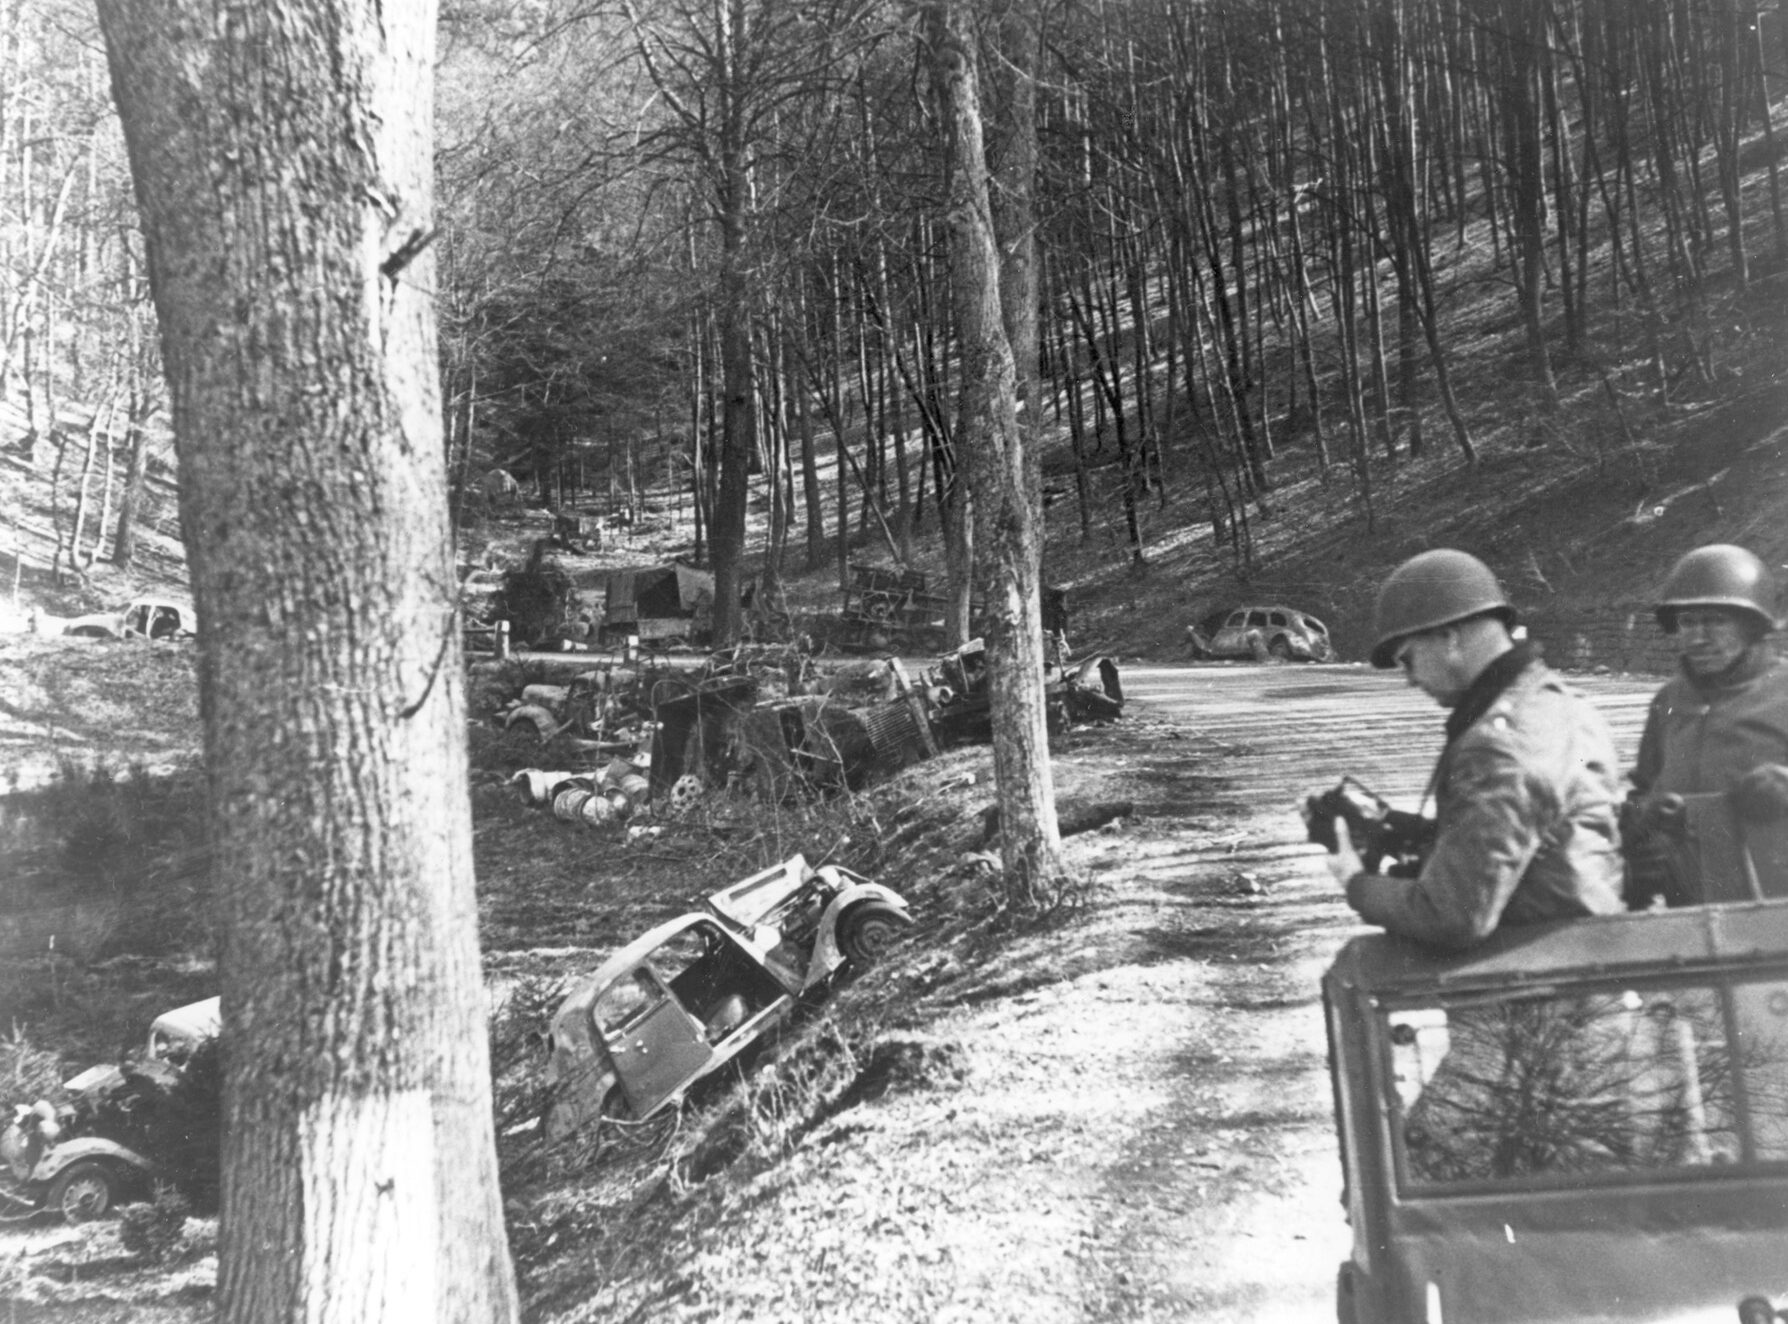 On the way into Germany, Patton photographed the awesome power of the American Air Forces. Near the town of Neustadt, he saw “one of the greatest scenes of destruction I have ever encountered.” American fighters had strafed a retreating German column. Wrecked German vehicles and dead horses littered the road for two miles. Patton took photo after photo as his command car drove through the devastation.